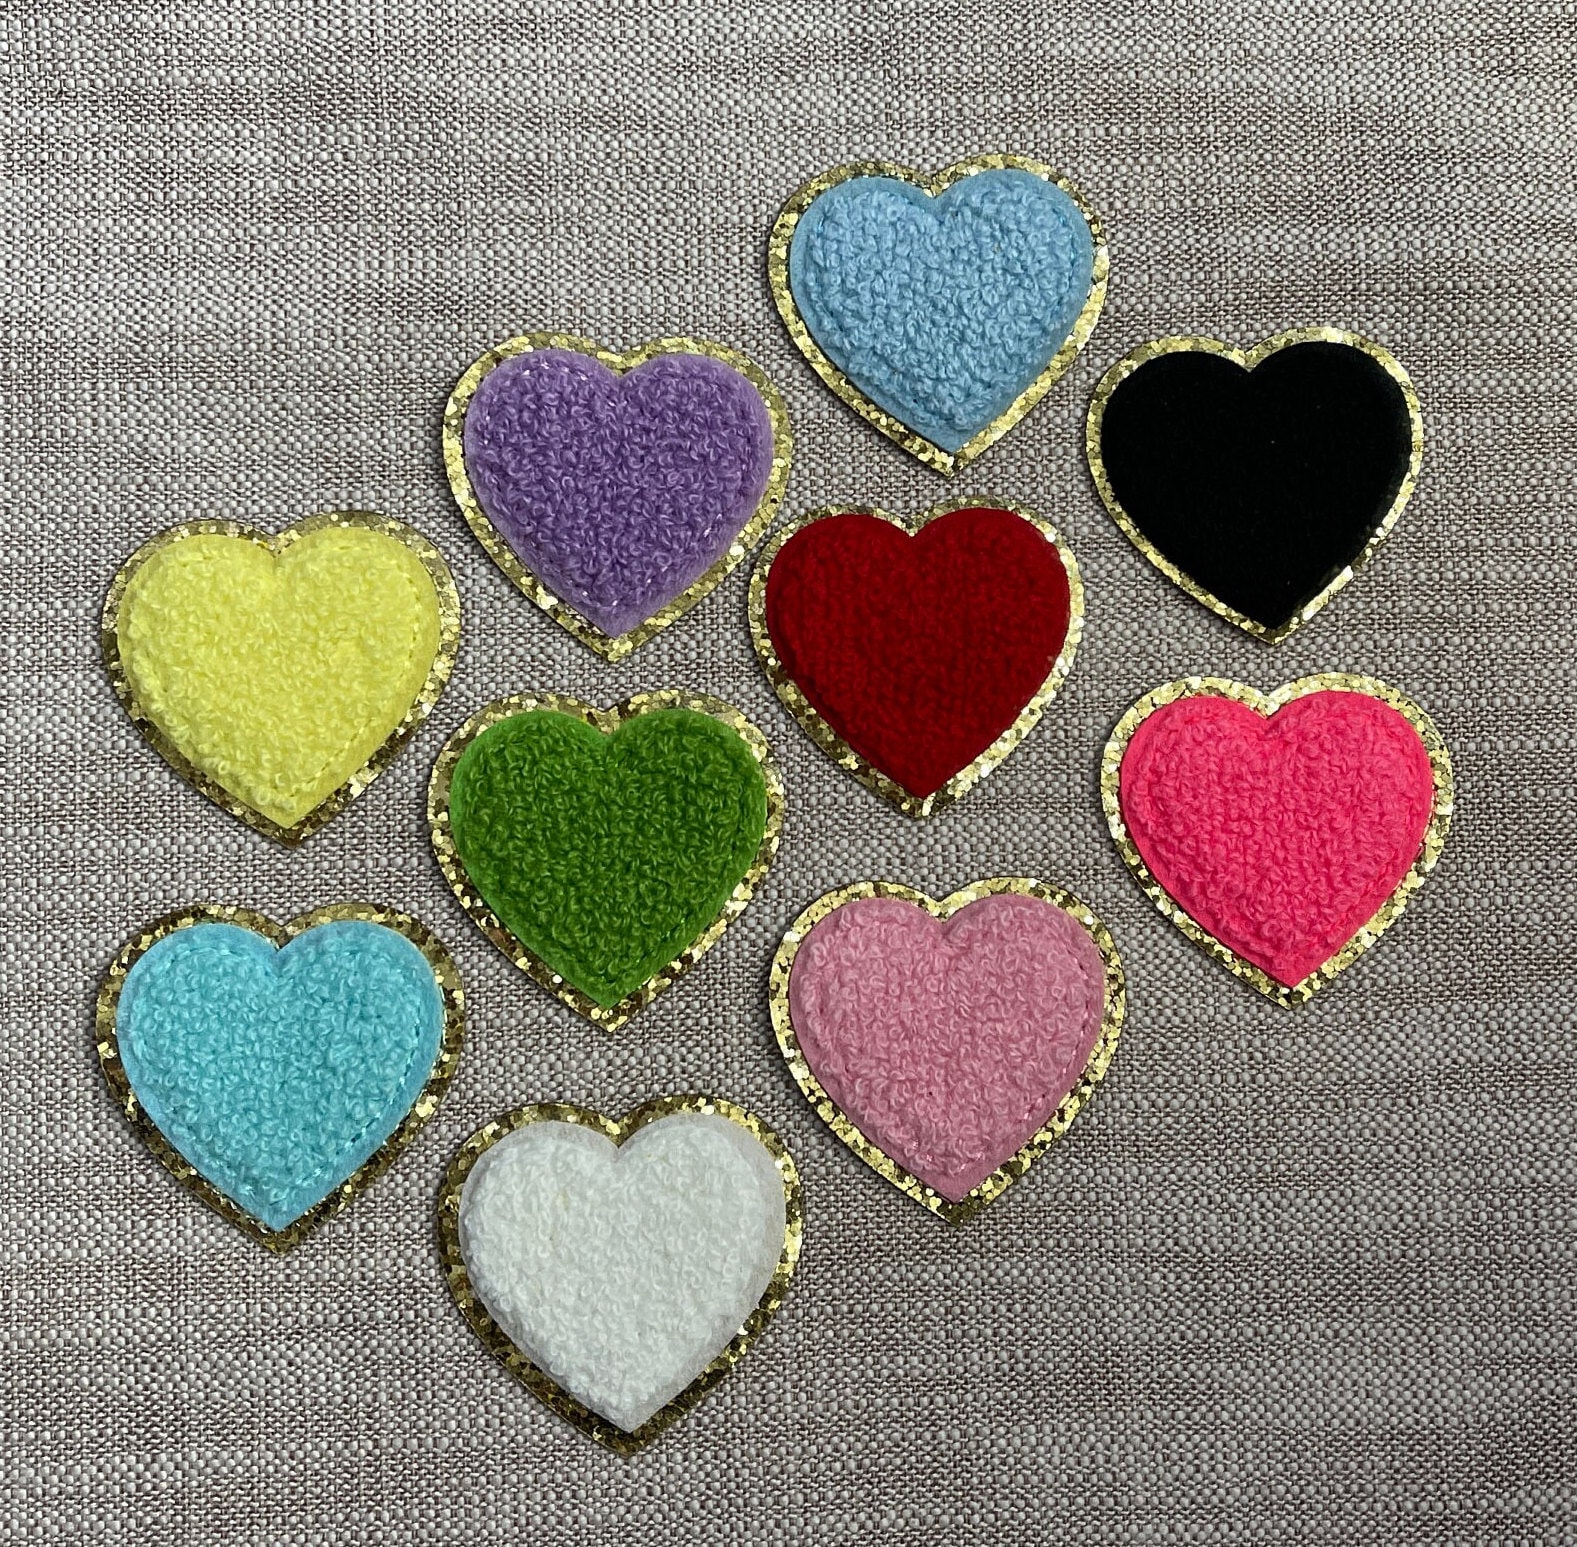 Iron on Patches - Red Heart Patch 10 Pcs Iron on Patch Embroidered Applique 1.26 x 1.18 Inches (3.2 x 3 cm) A-92